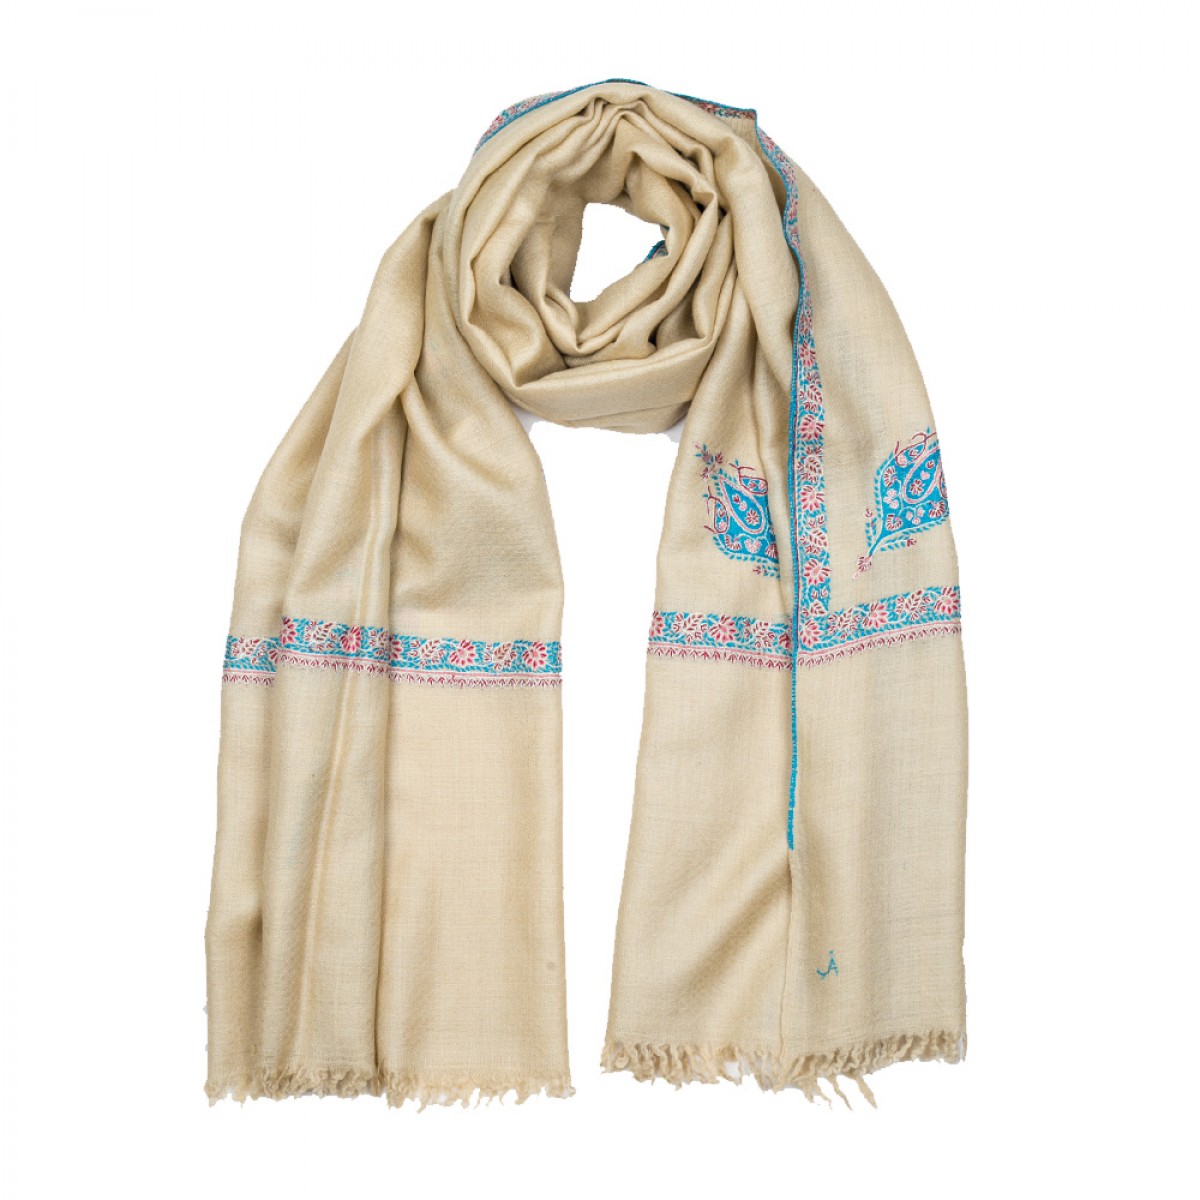 Embroidered Pashmina Stole - Sand & Turquoise